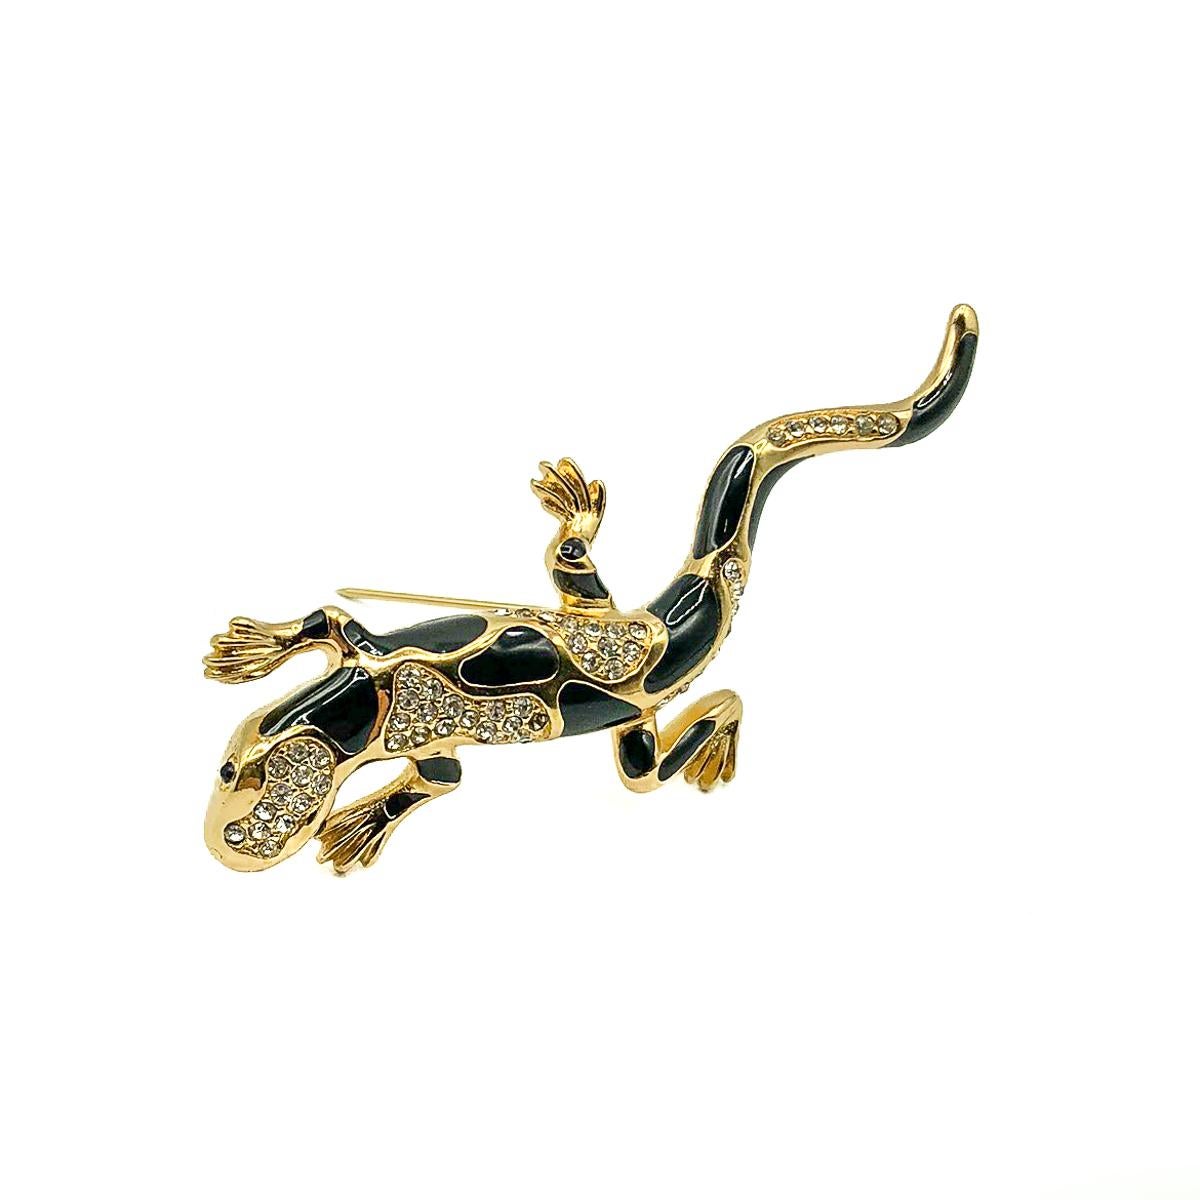 A delightful Vintage Dior Lizard Brooch. Crafted in gold plated metal and set with crystals and enamelling. The lizard is believed to be associated with protection, good fortune and prosperity. In very good vintage condition. Signed. 7.5cms. A